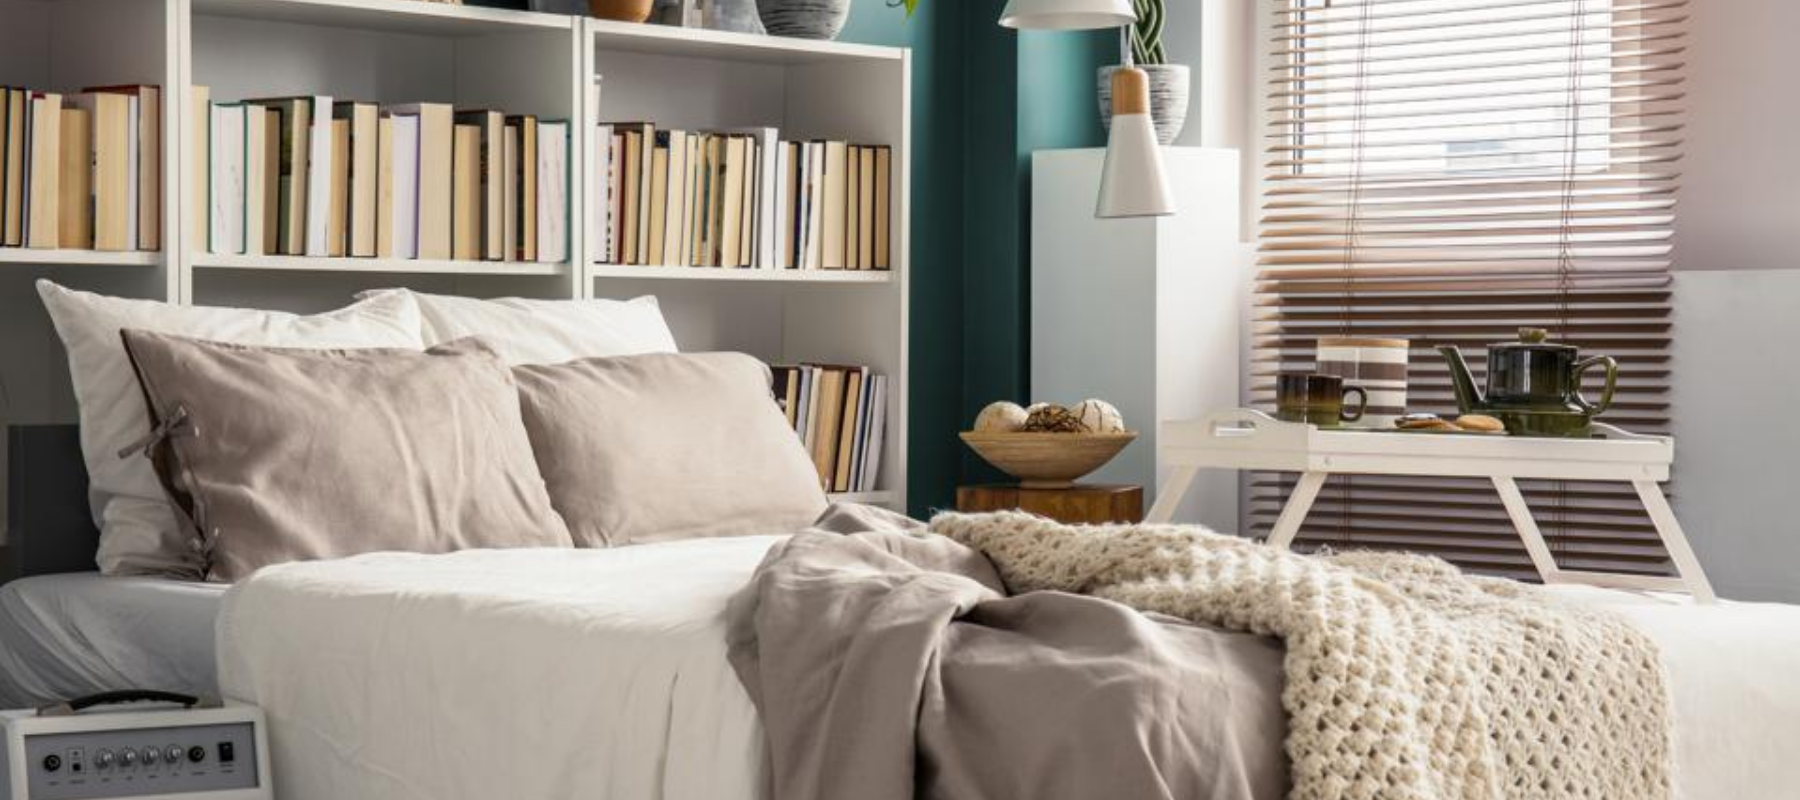 Easy Hacks To Save Space In Your Bedroom